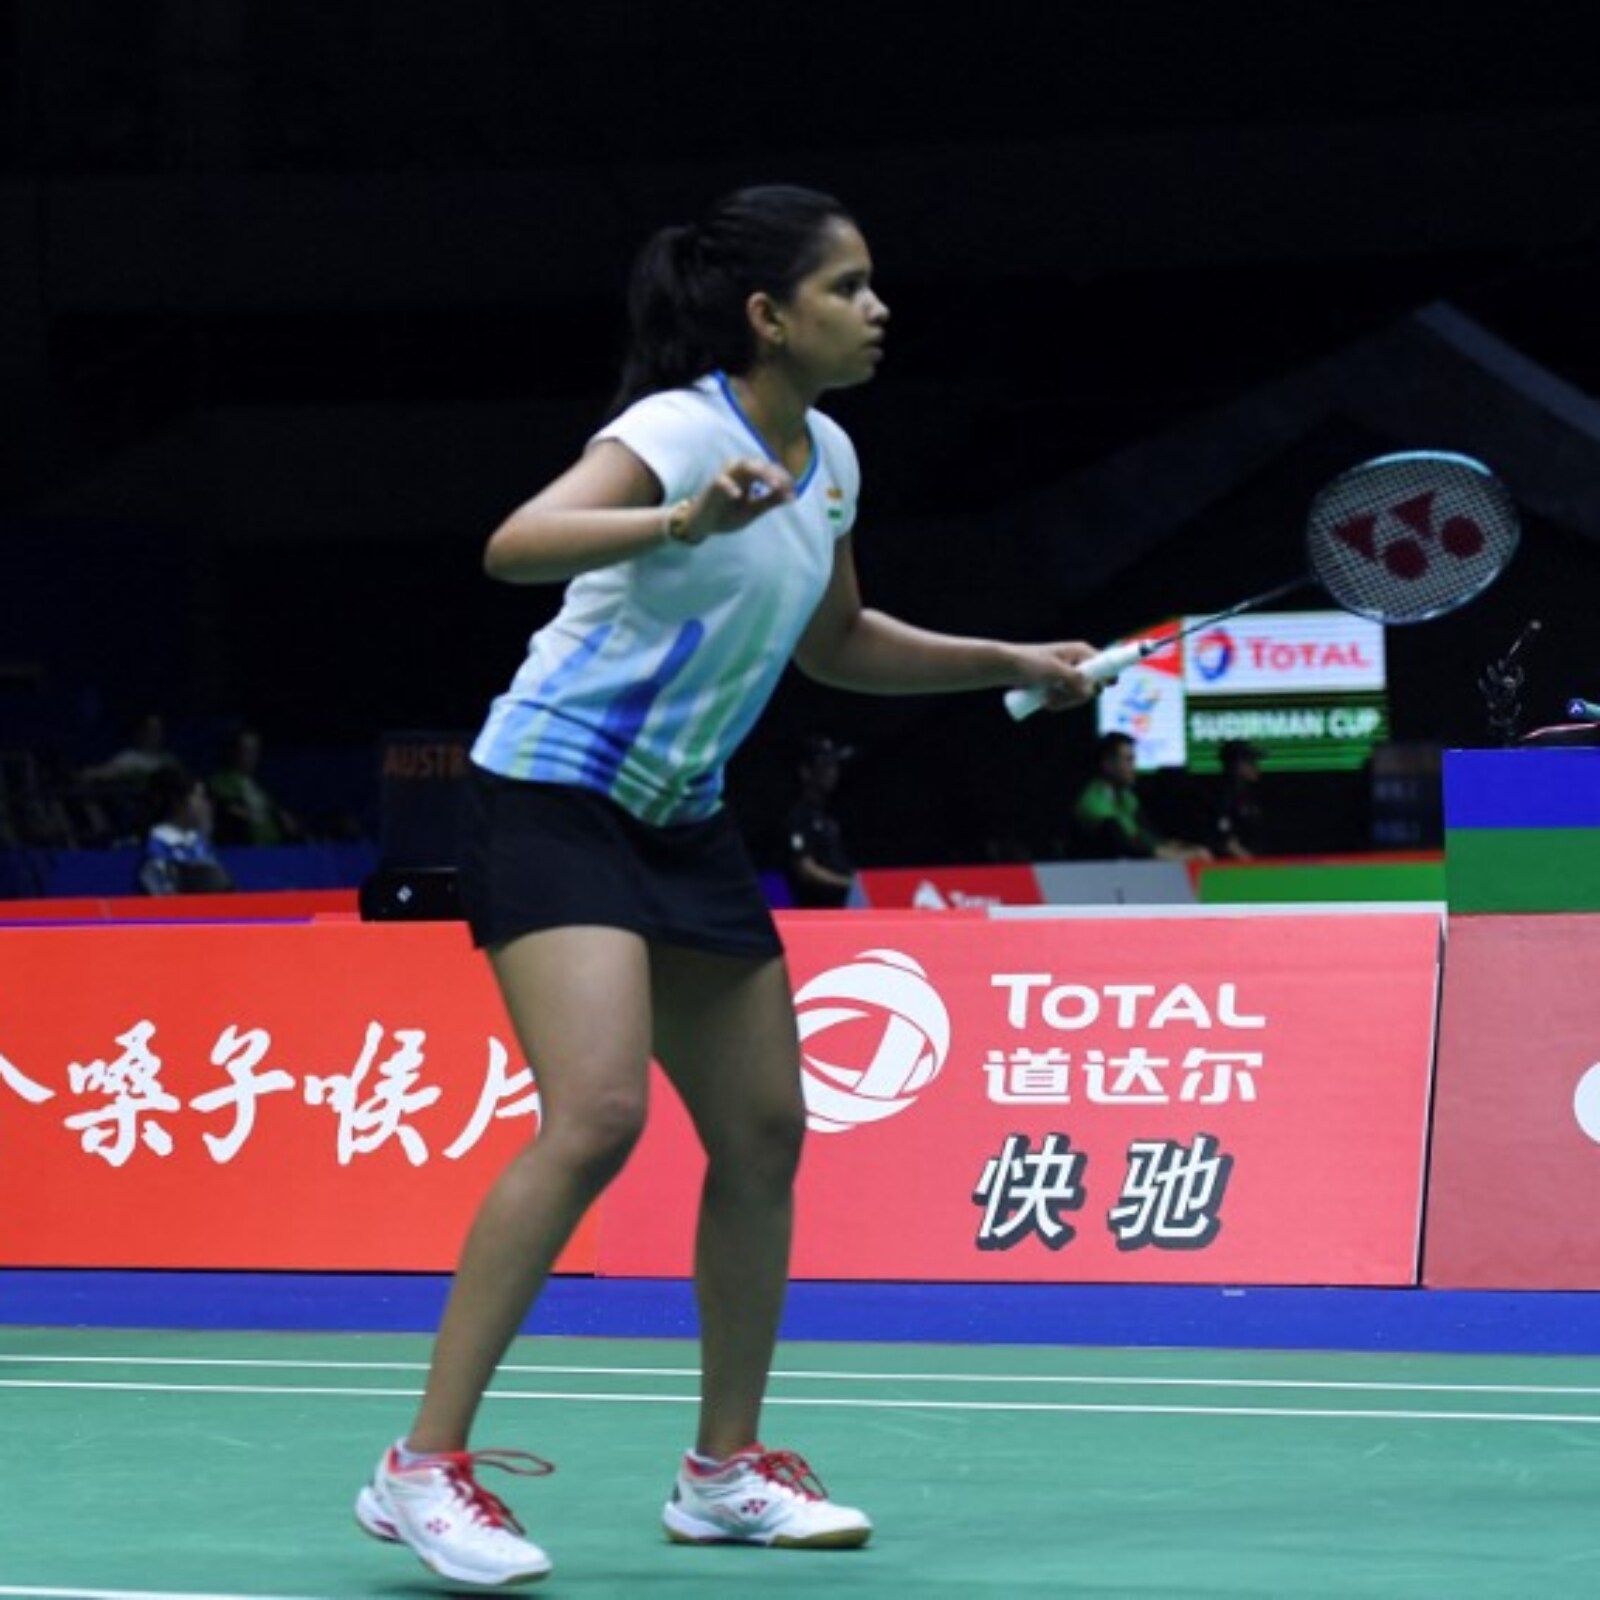 Vietnam Open 2022 Indian Campaign Ends as N Sikki Reddy-Rohan Kapoor Lose in Mixed Doubles Semis